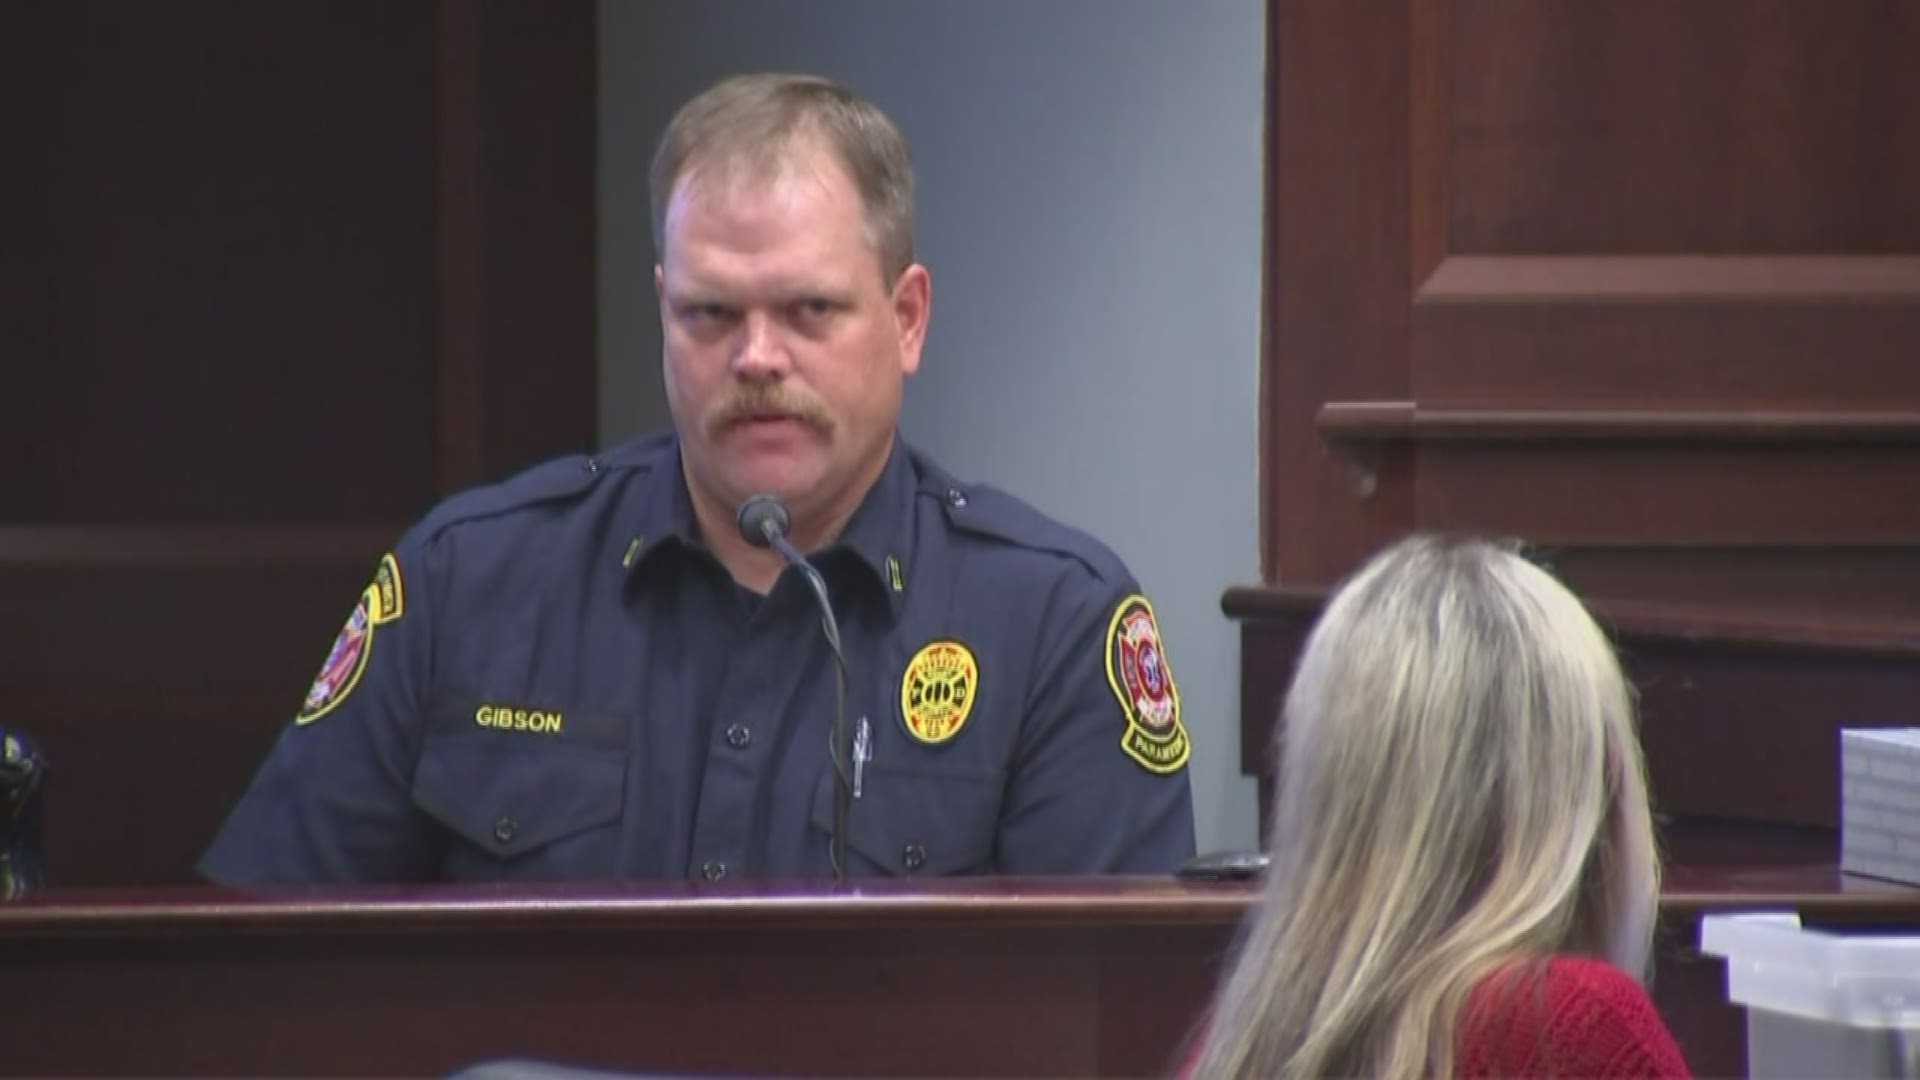 A firefighter testifies about the death of 2-year-old Laila Daniel. This is court testimony from July 17, 2019. Watch the trial each day on YouTube.com/11alive